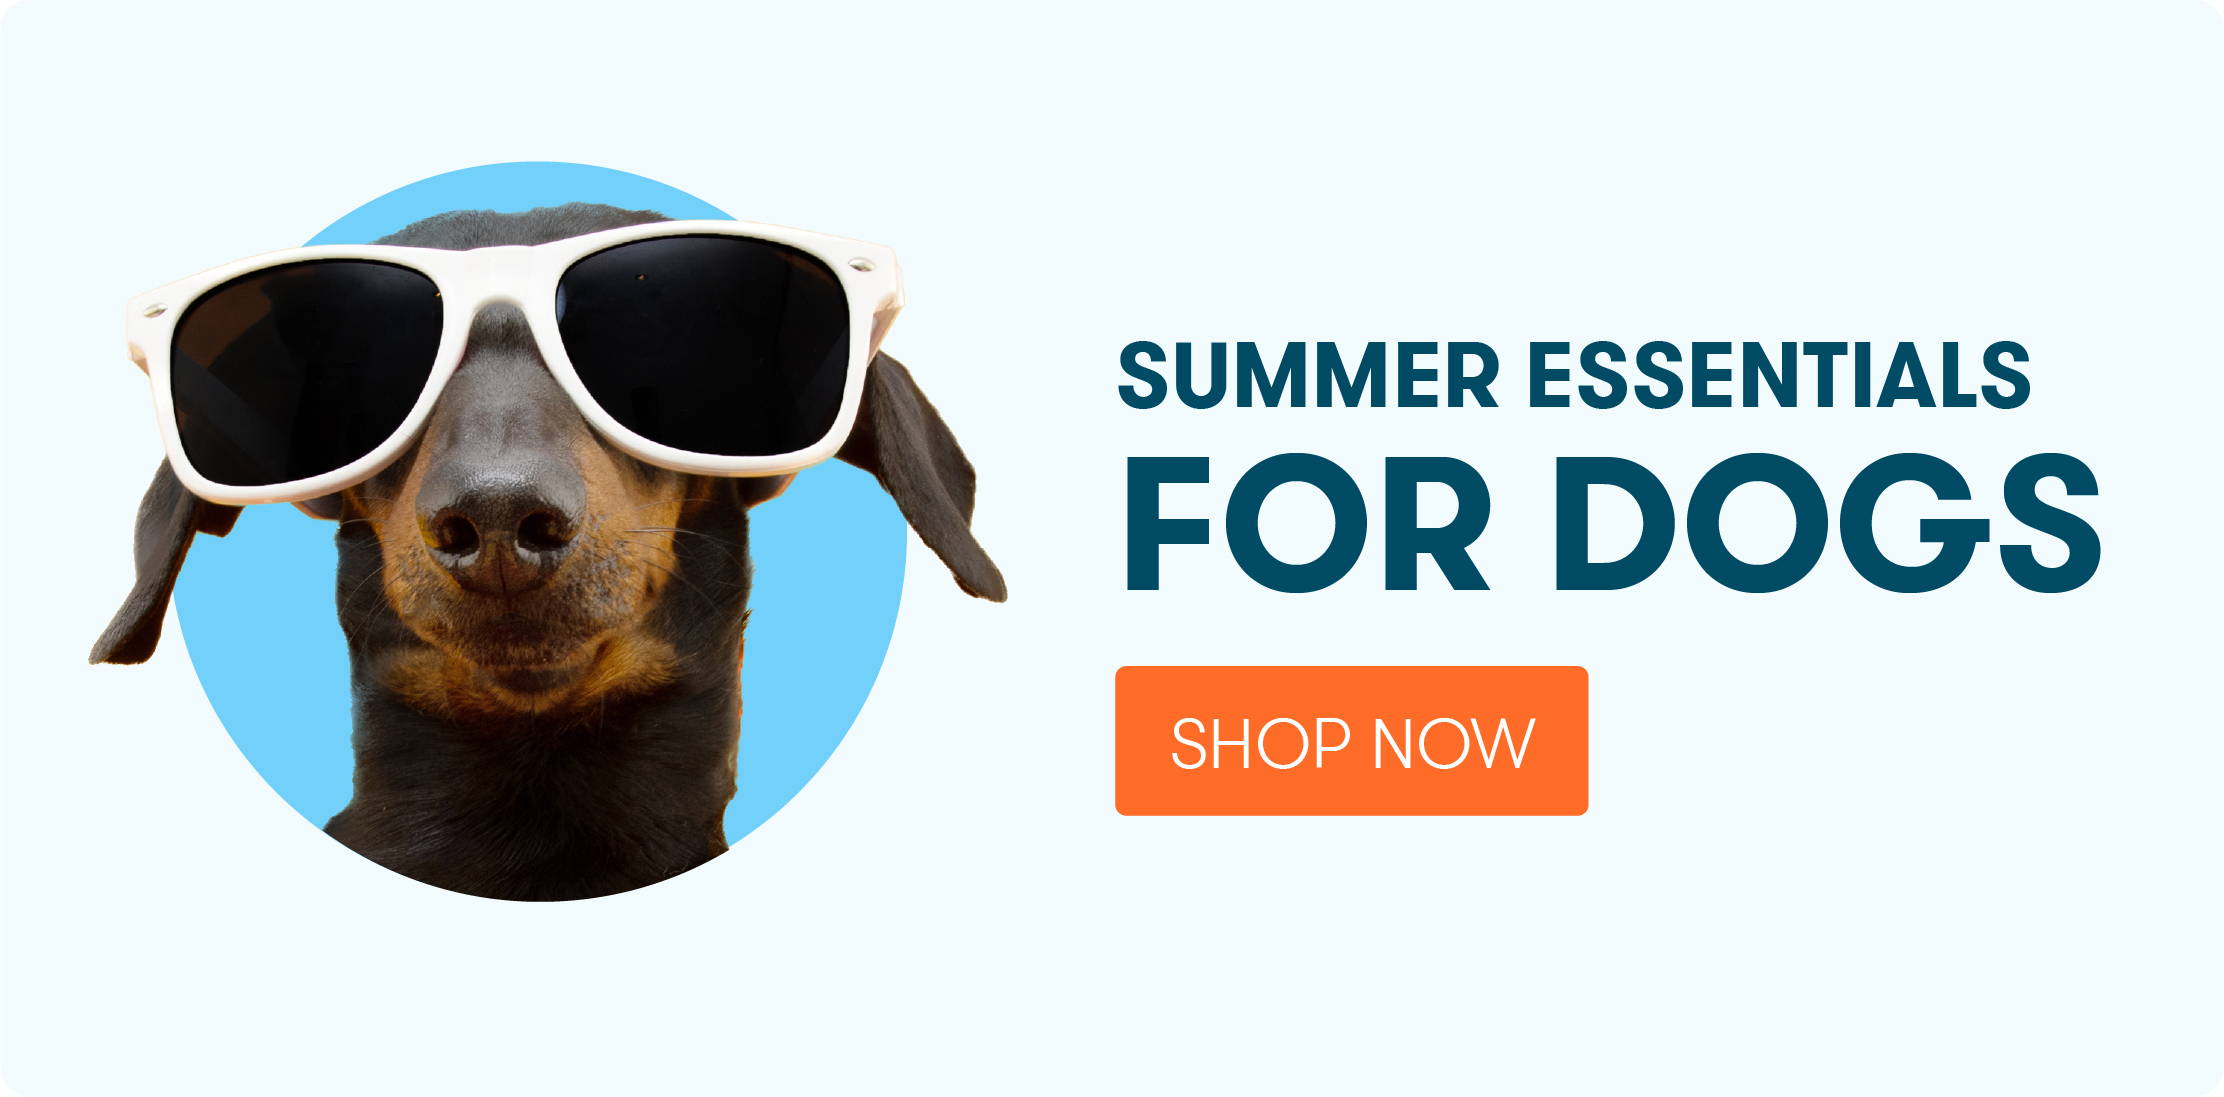 Summer Essentials For Dogs